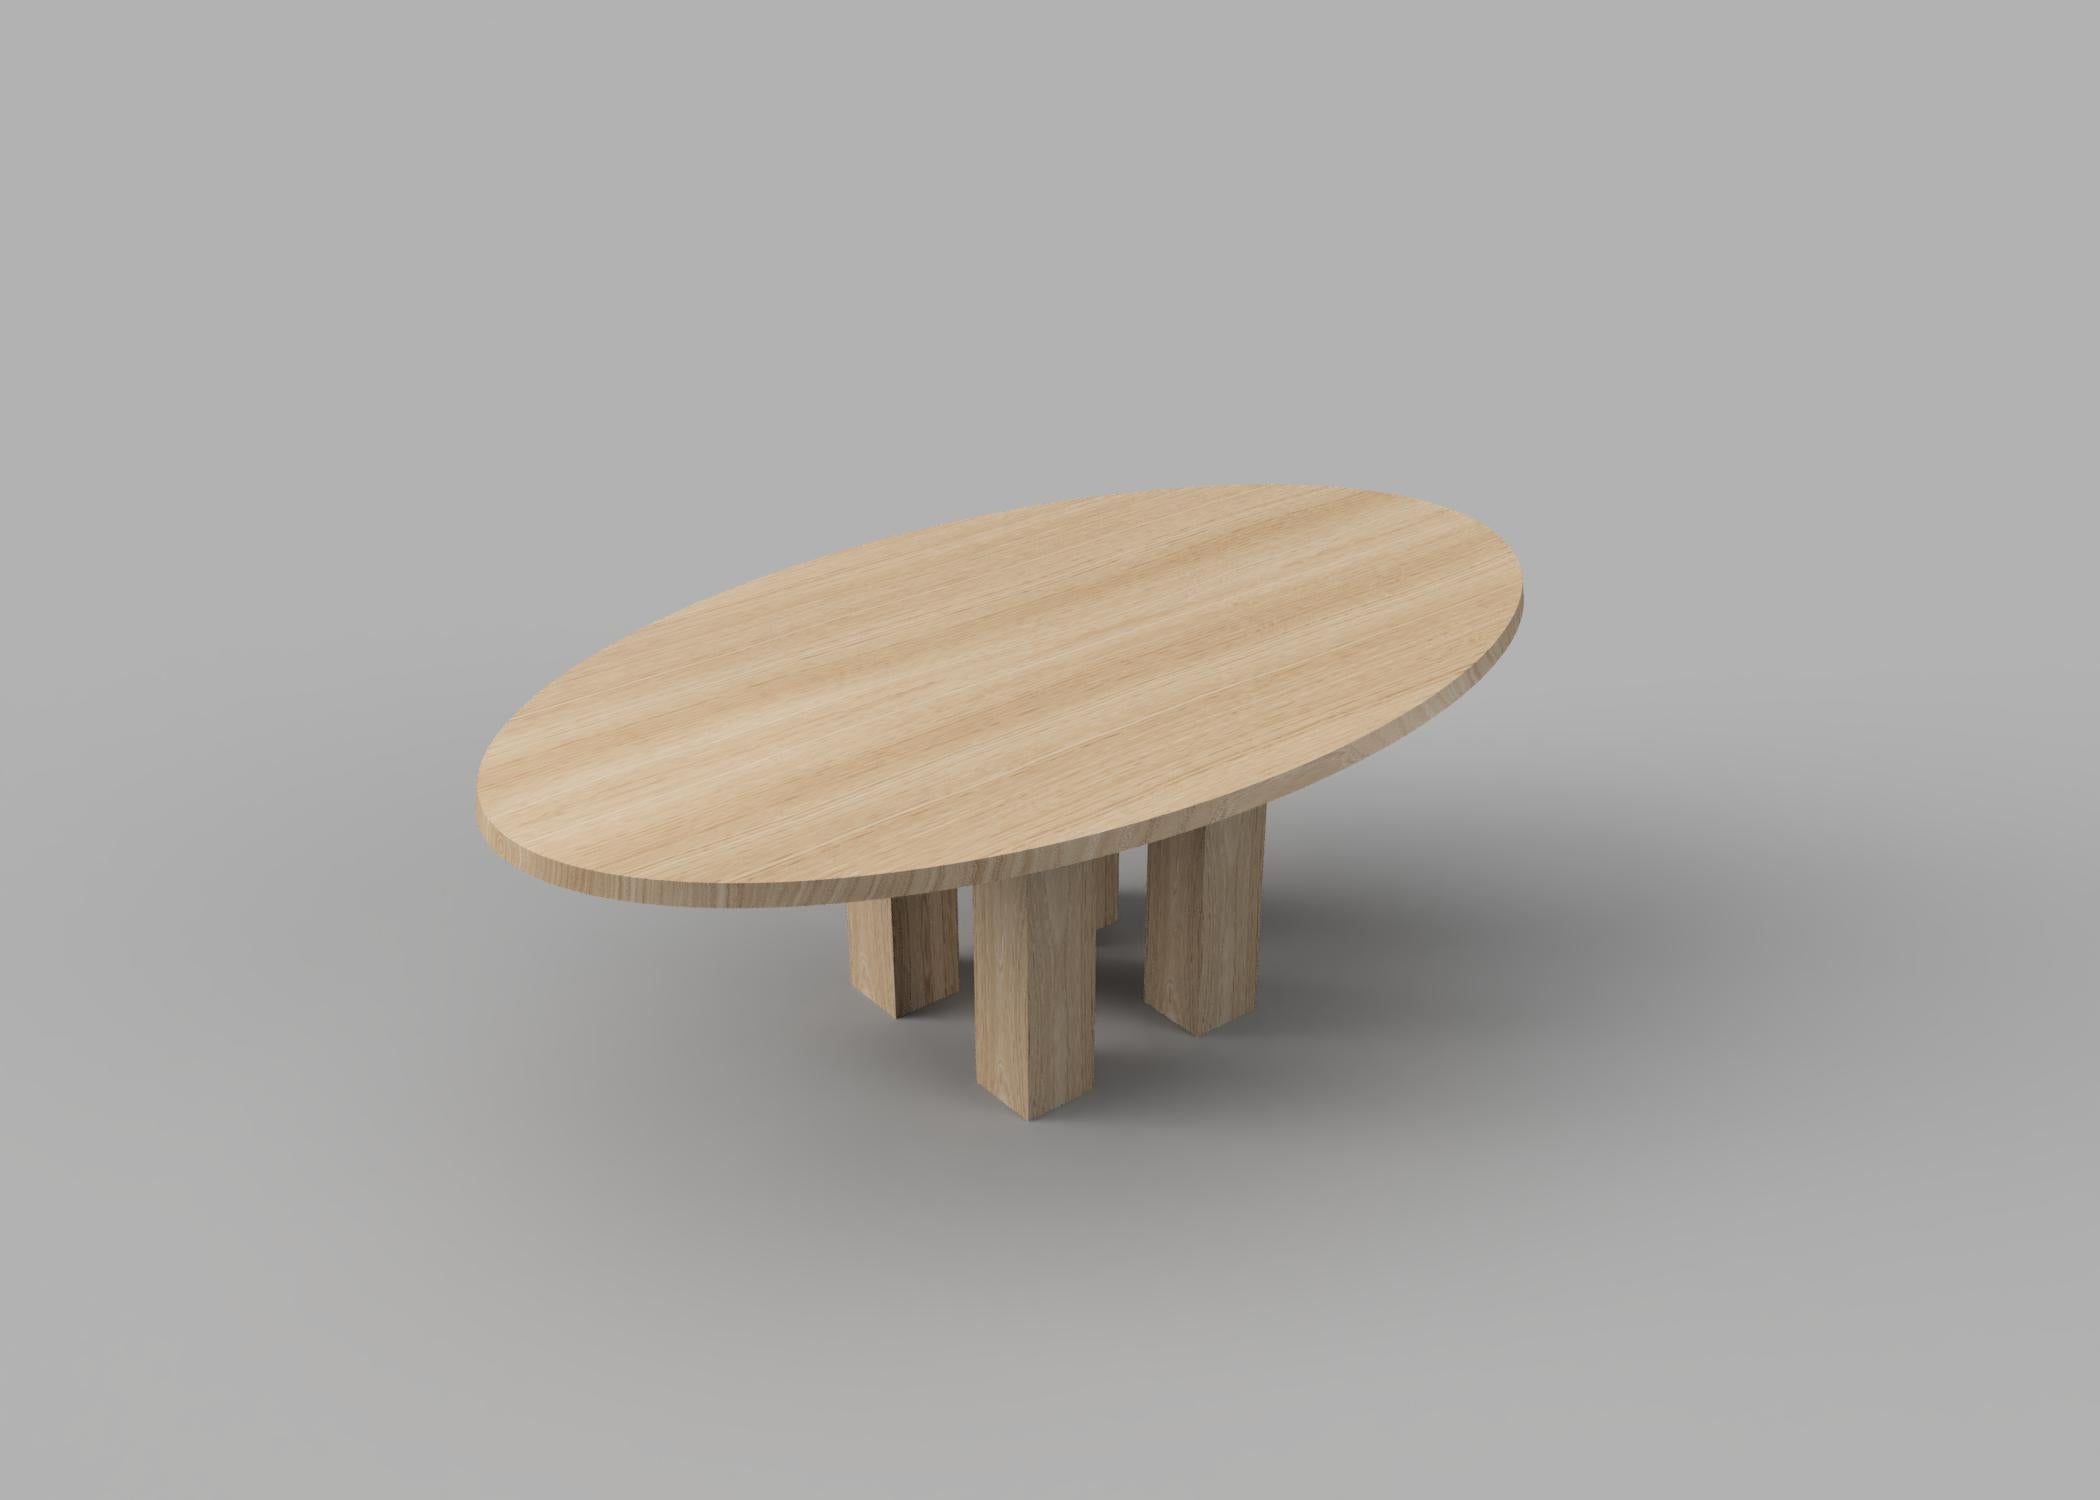 Custom oval table.

This piece quietly challenges the archetype of a table with the unexpected proportion of the legs and hidden detailing. A single plane effortlessly floats atop four oversized wood legs.

Beautifully crafted with high grade solid